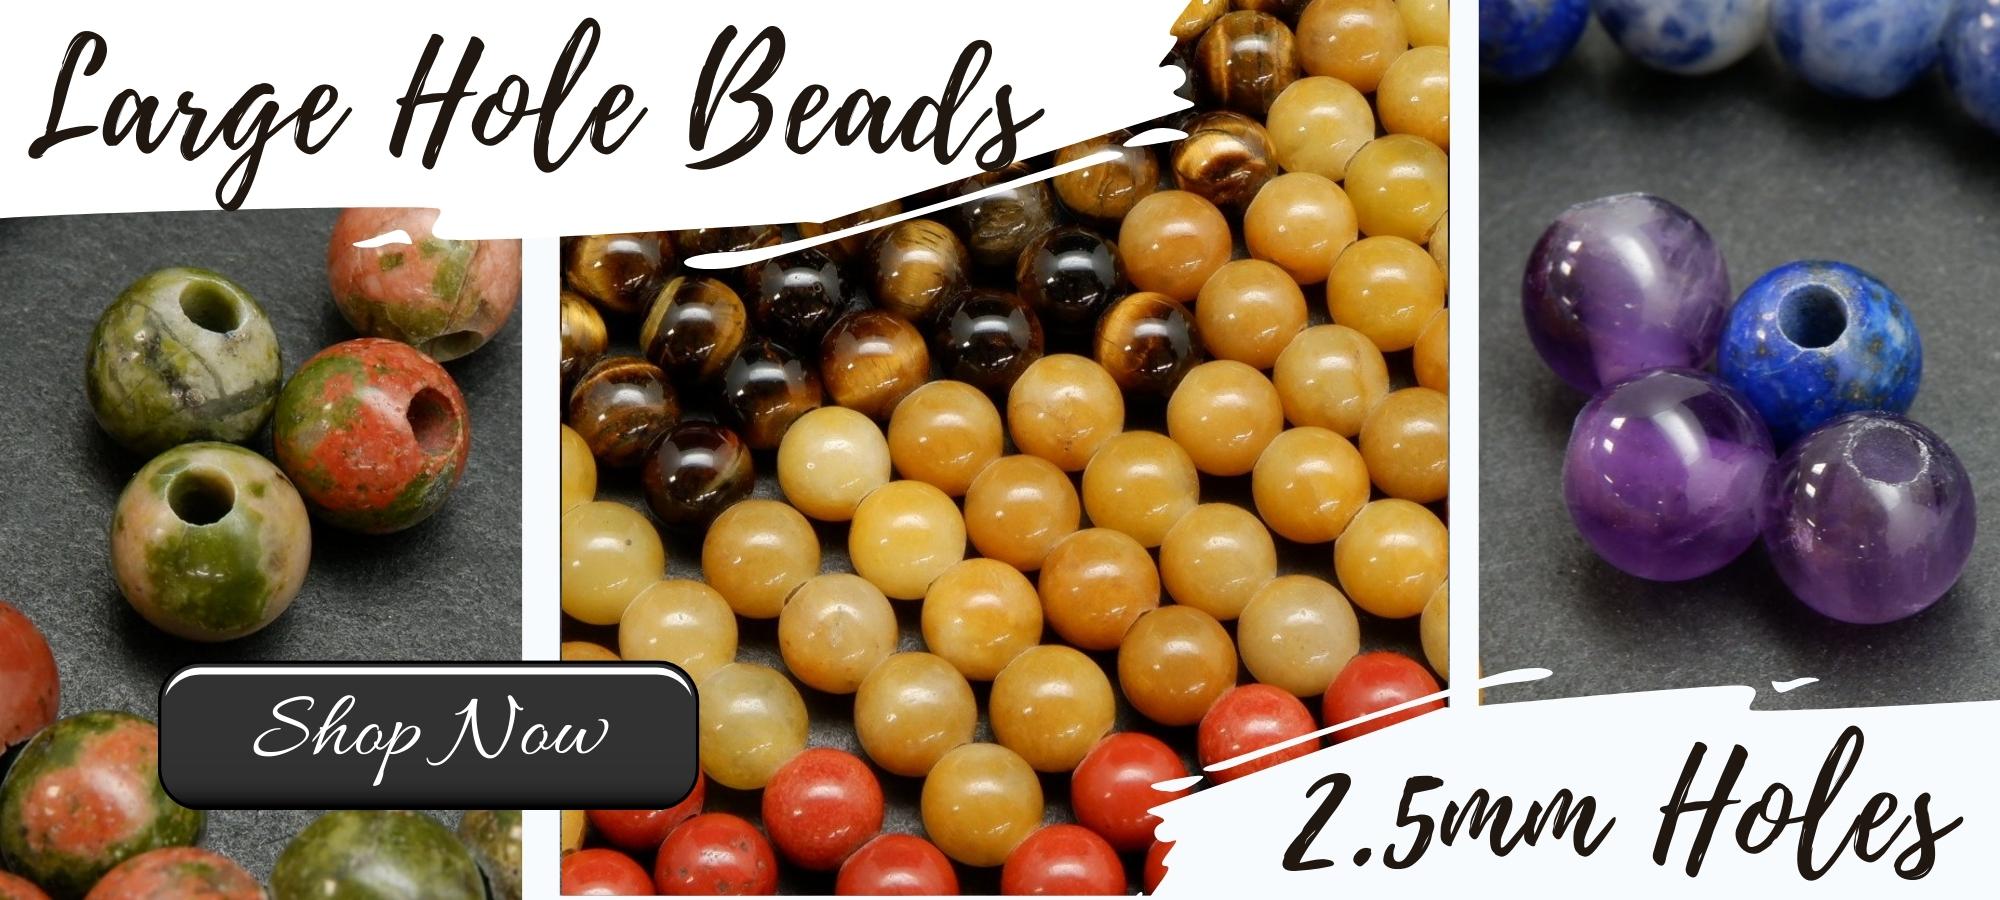 Large Hole Beads with Holes 2mm and larger.